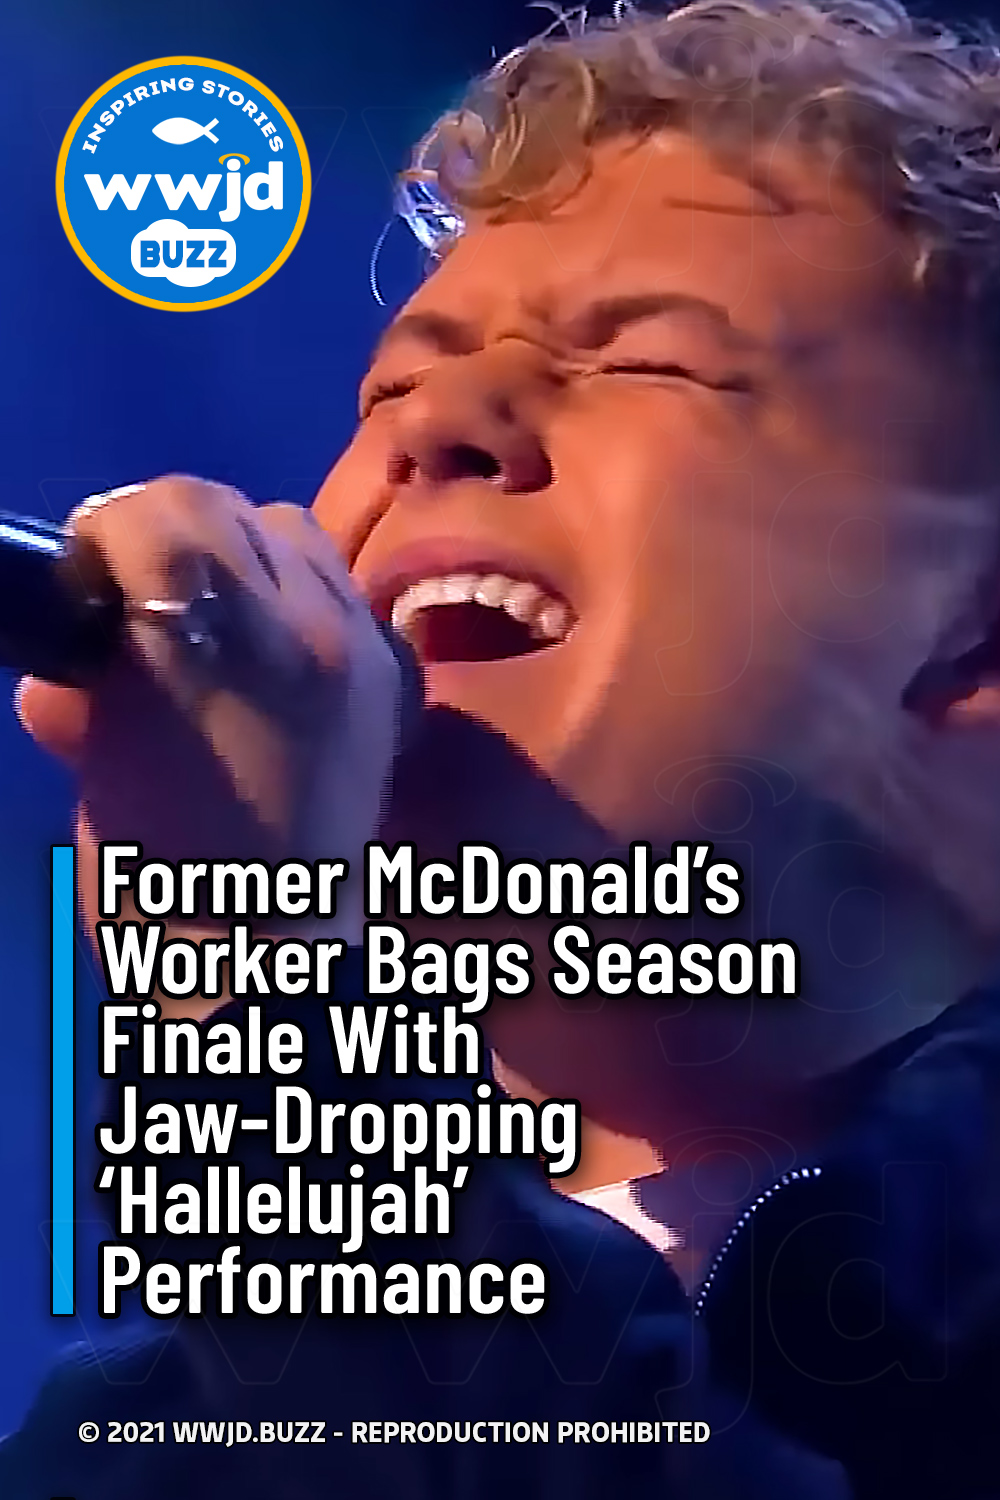 Former McDonald\'s Worker Bags Season Finale With Jaw-Dropping \'Hallelujah\' Performance